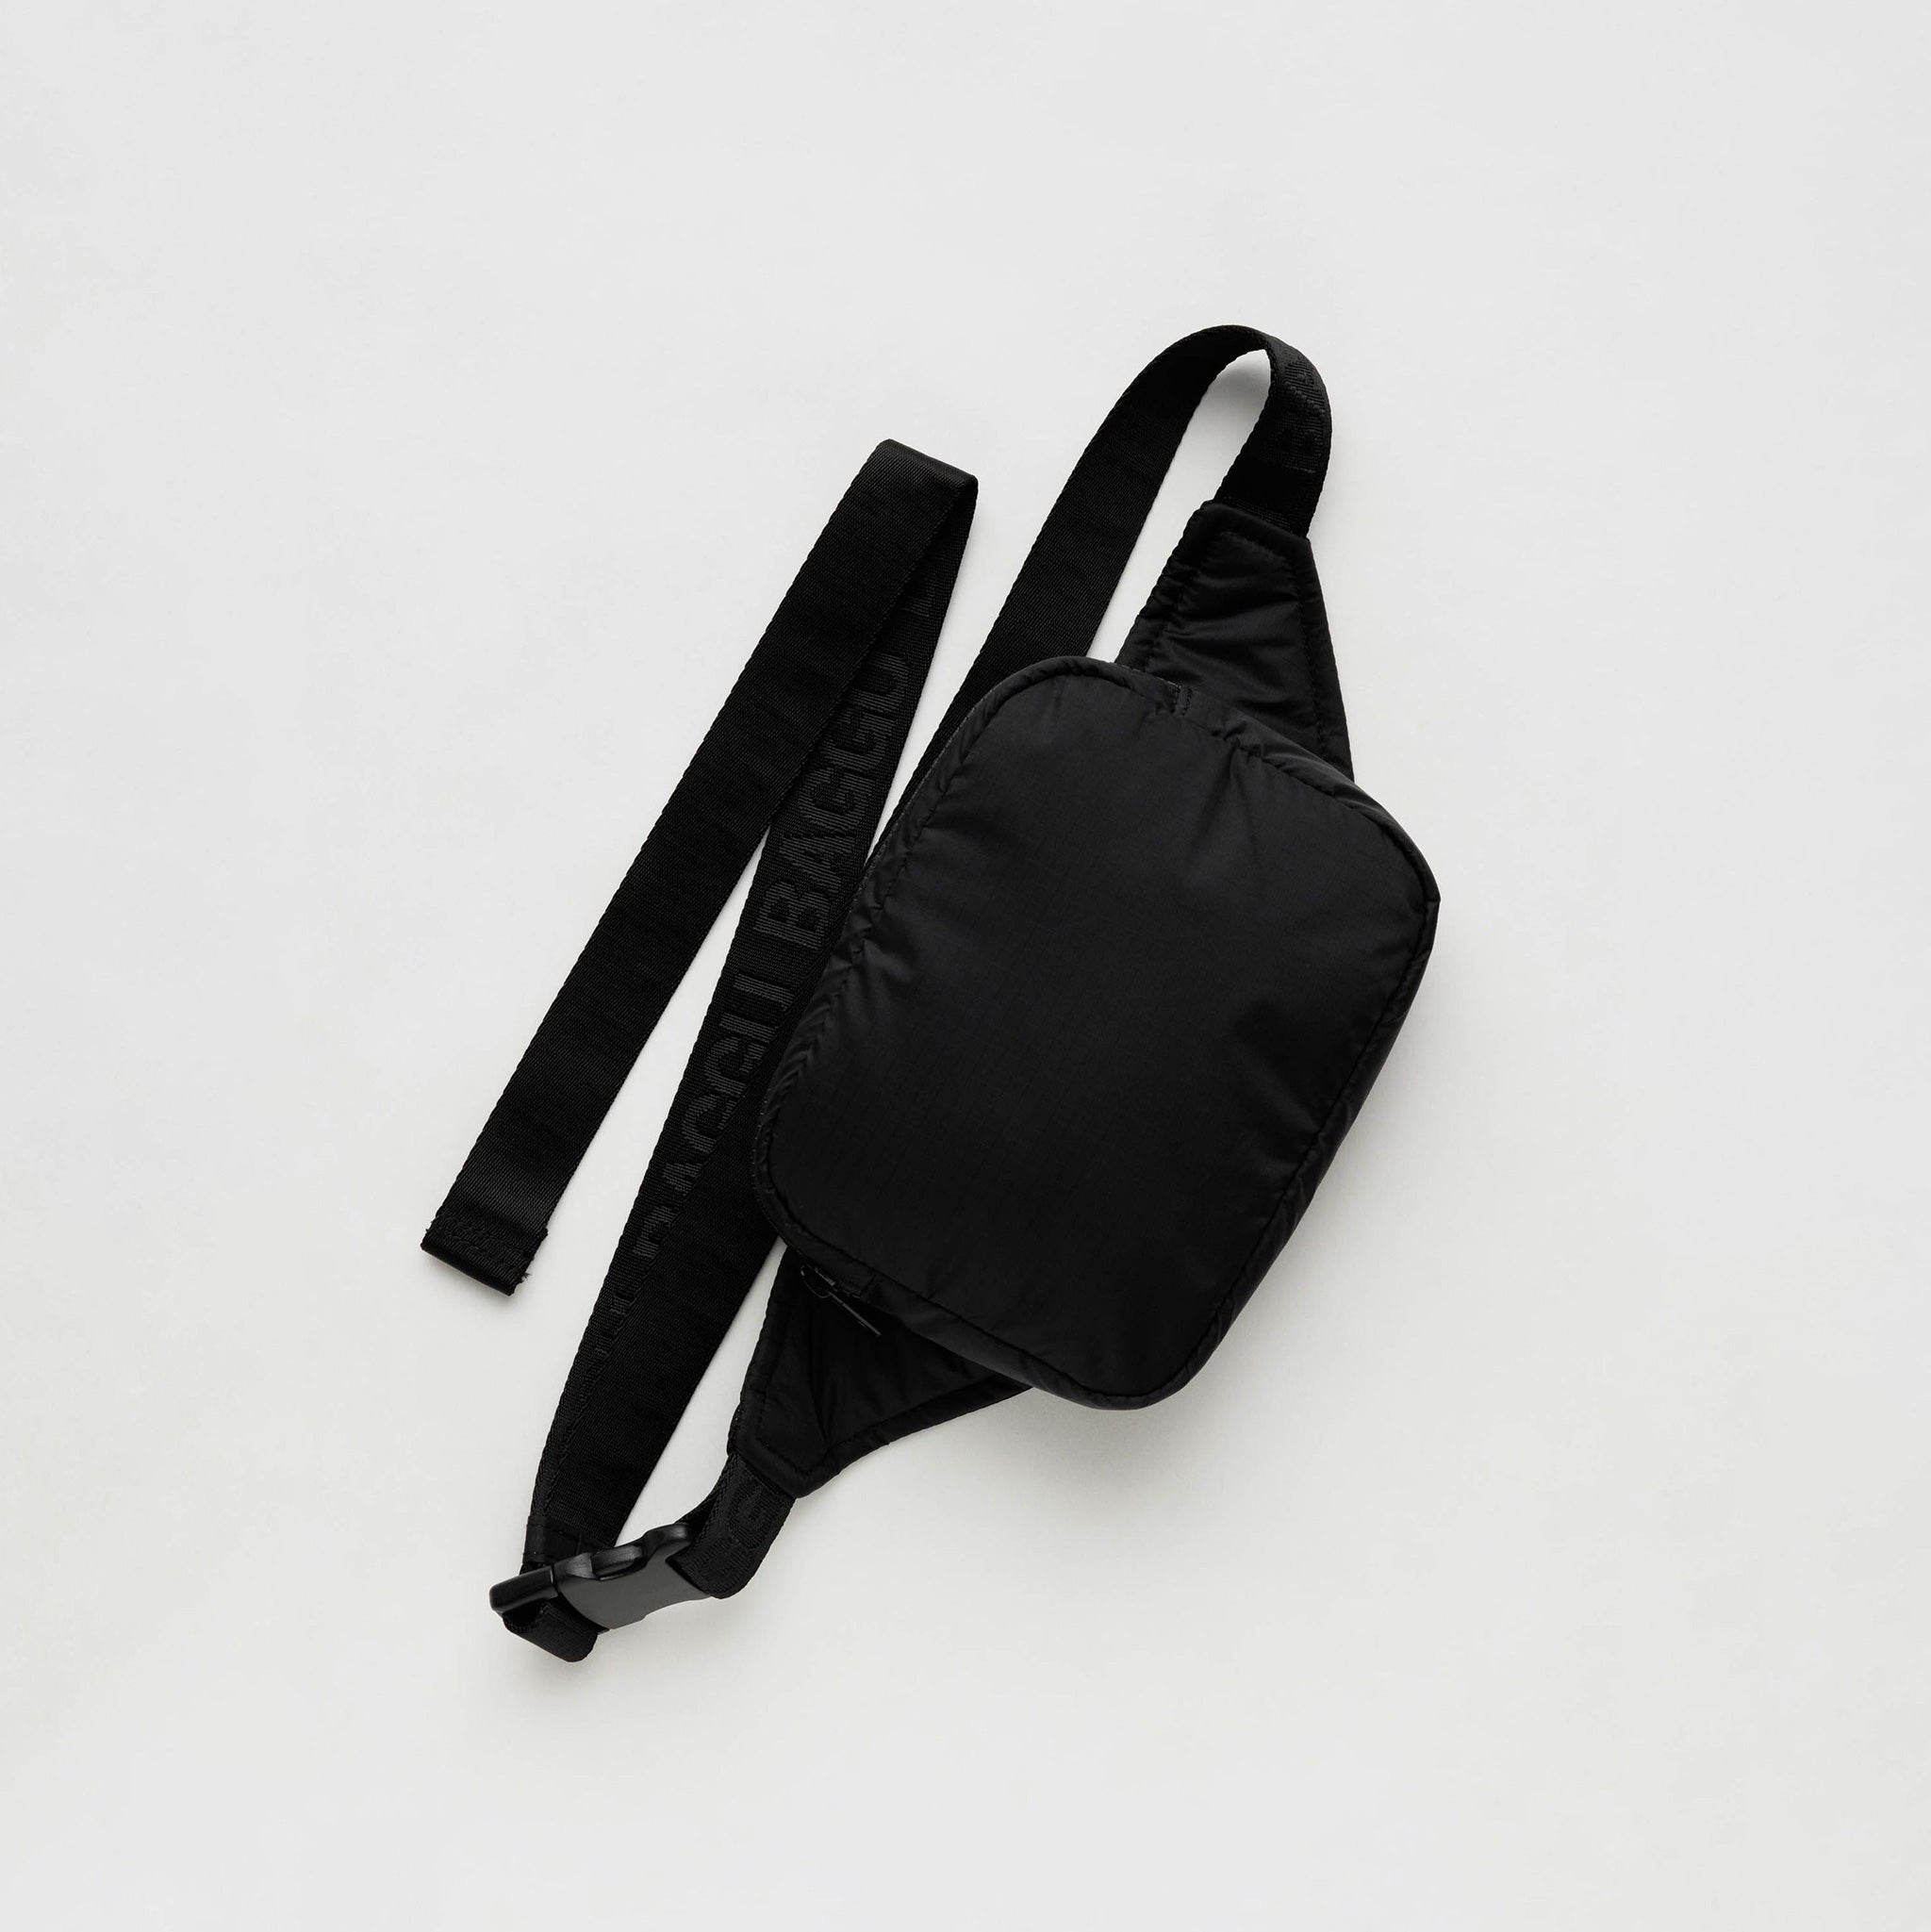 A rectangular black nylon fanny bag with the shell of the bag in a puffy fabric and repeating BAGGU logo debossed on the black nylon straps.